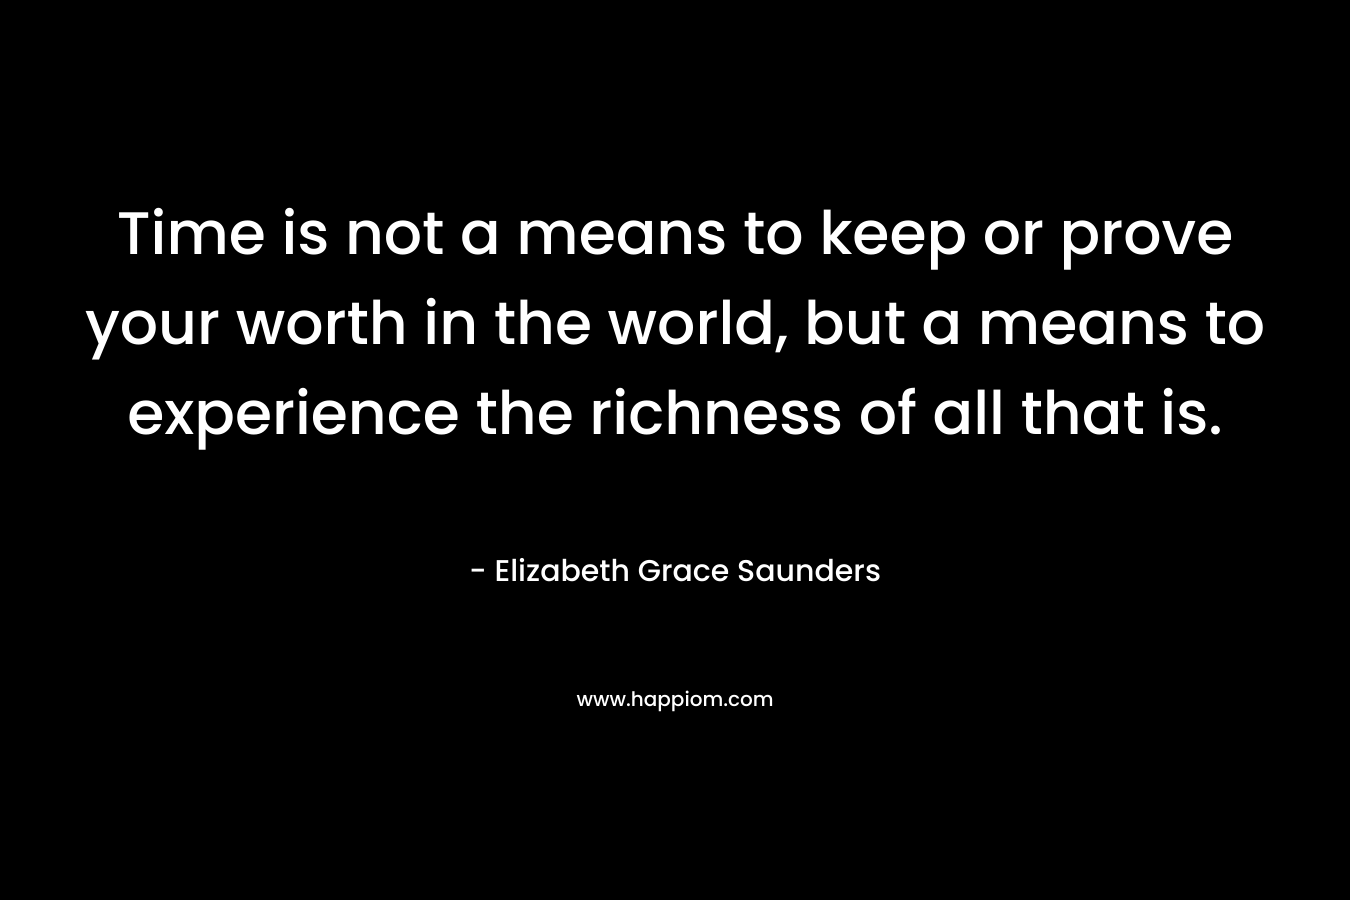 Time is not a means to keep or prove your worth in the world, but a means to experience the richness of all that is. – Elizabeth Grace Saunders